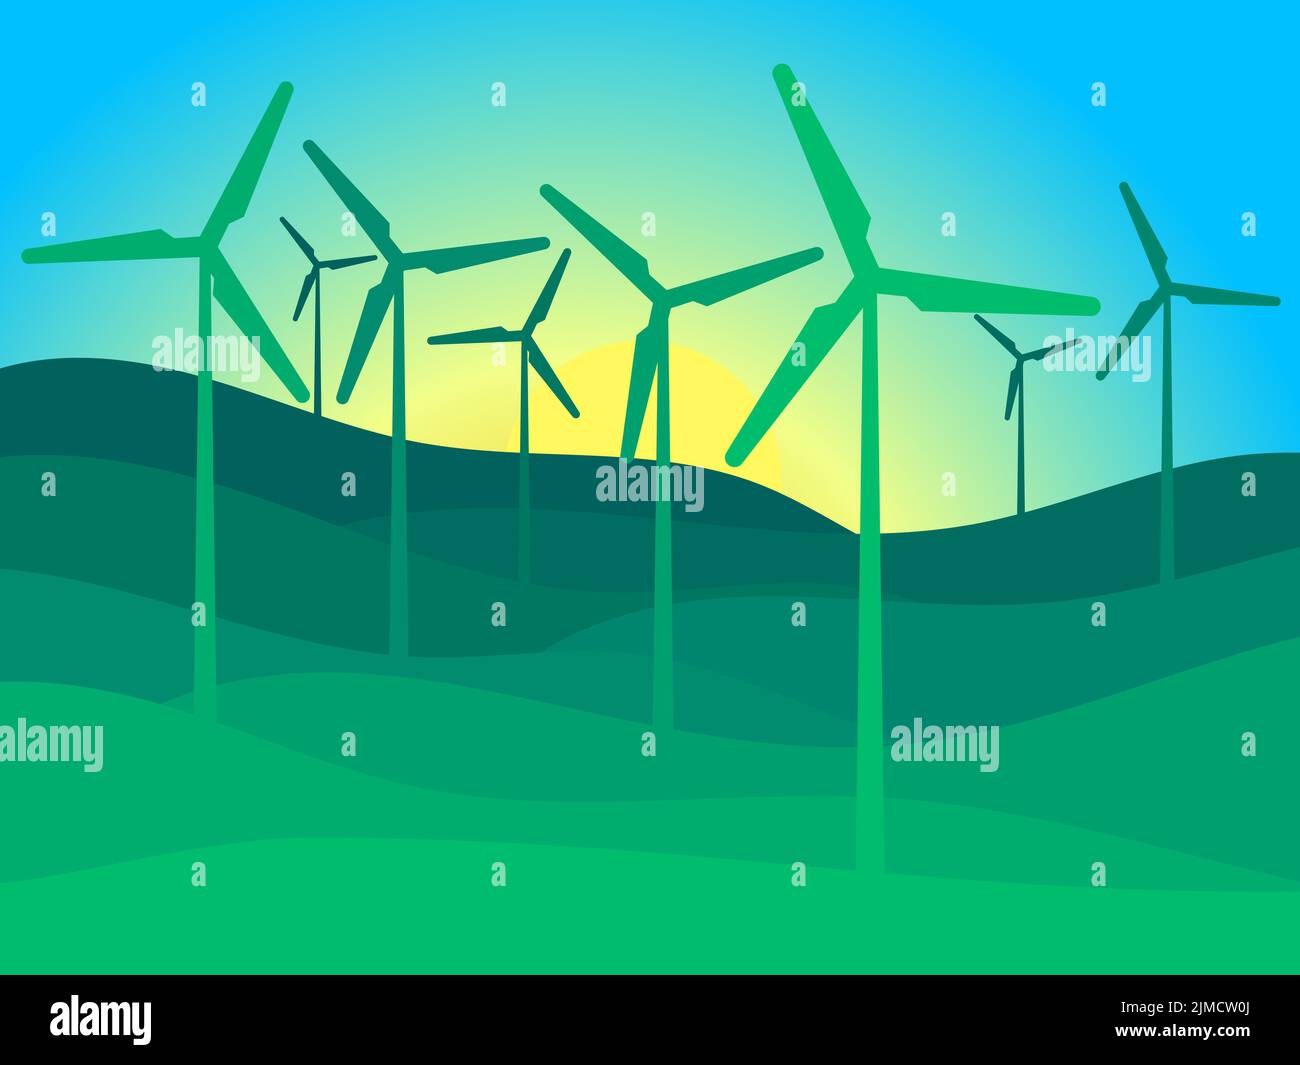 Landscape with wind turbines. Green energy concept, wind turbine silhouettes. Renewable energy, clean electricity production. Eco-friendly wind energy Stock Vector